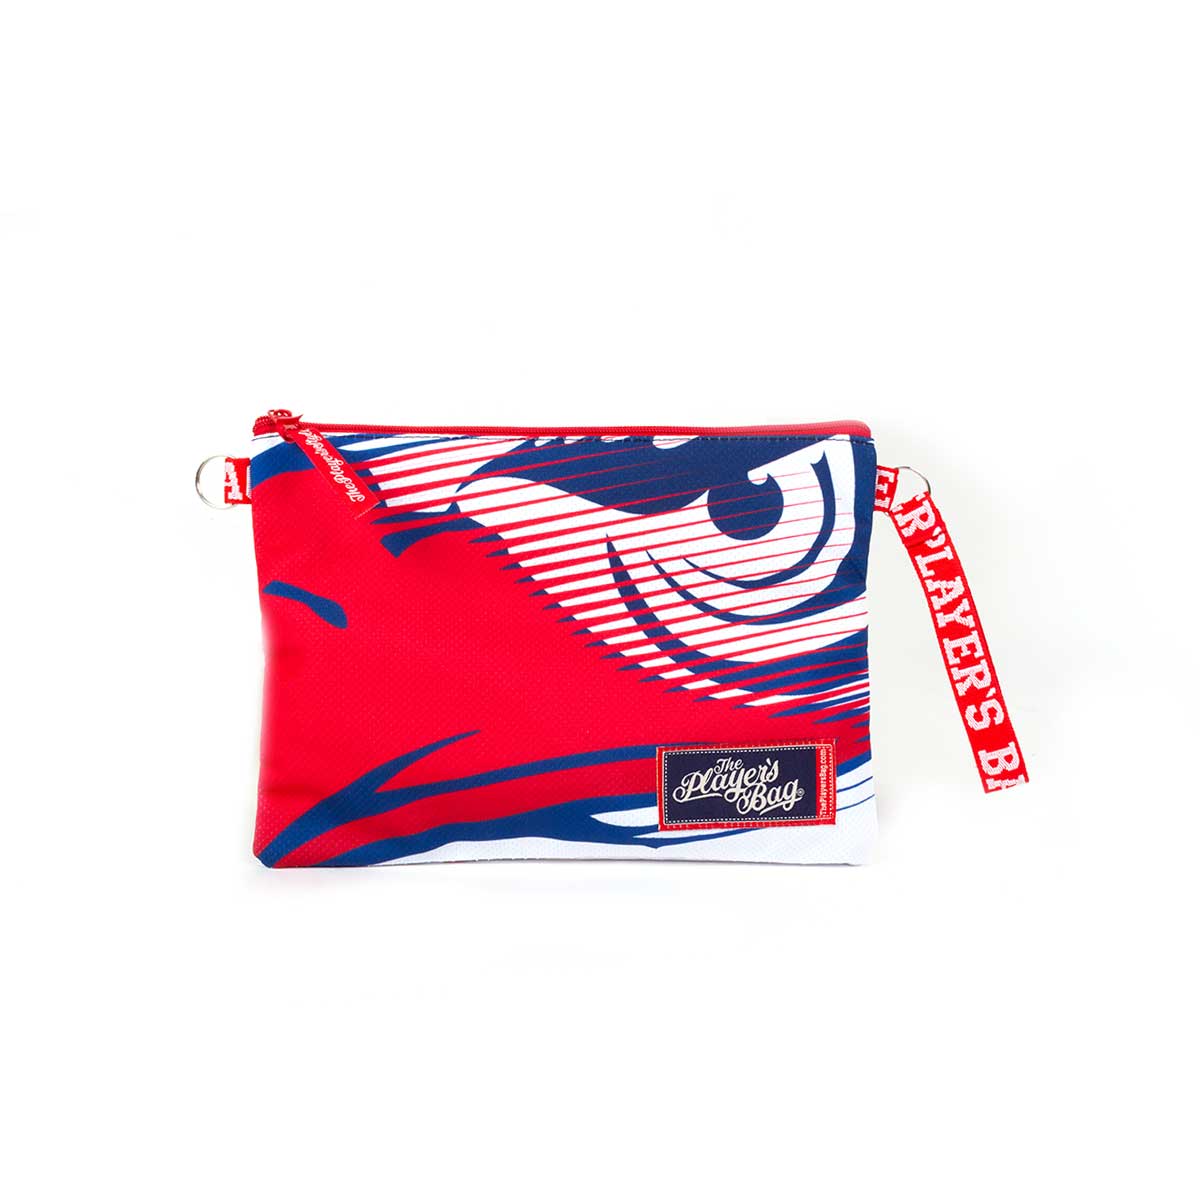 The Player's Style® Clutch Adler Mannheim Details